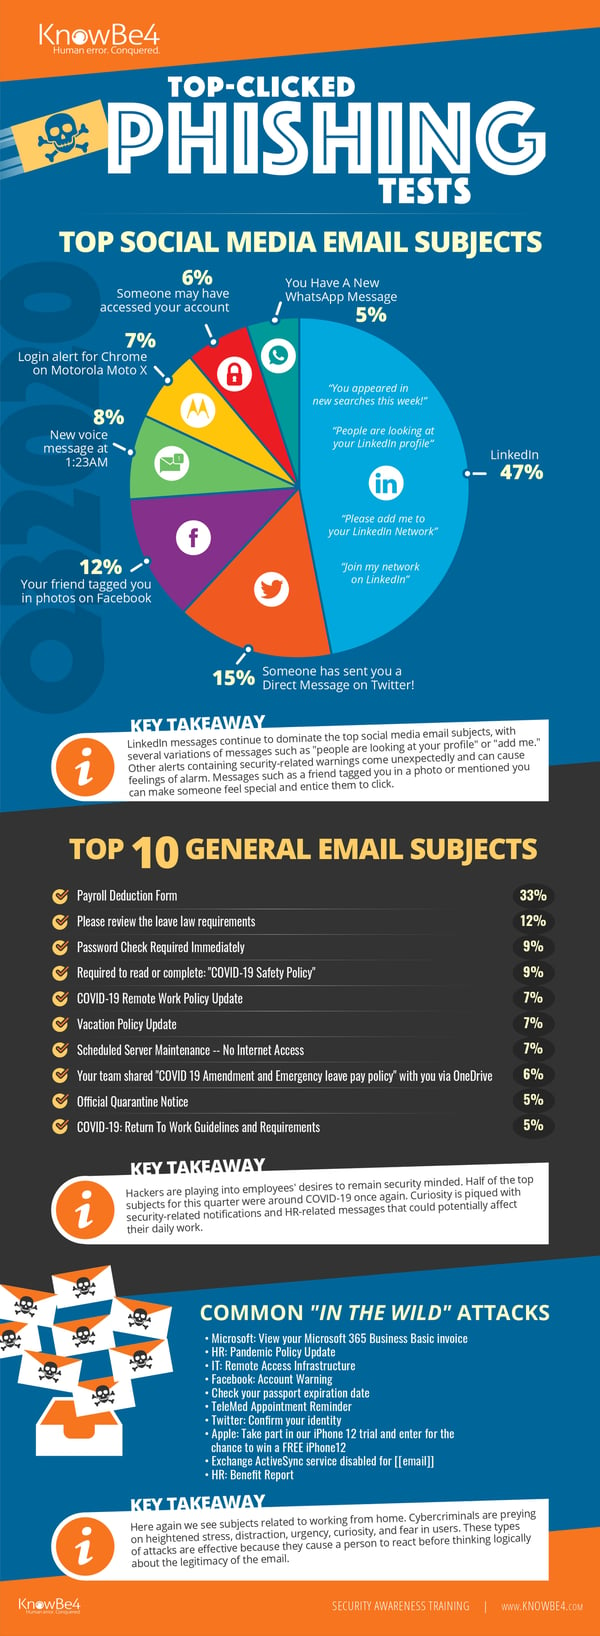 Q3 2020 Top Clicked Phishing Email Subjects Infographic from KnowBe4